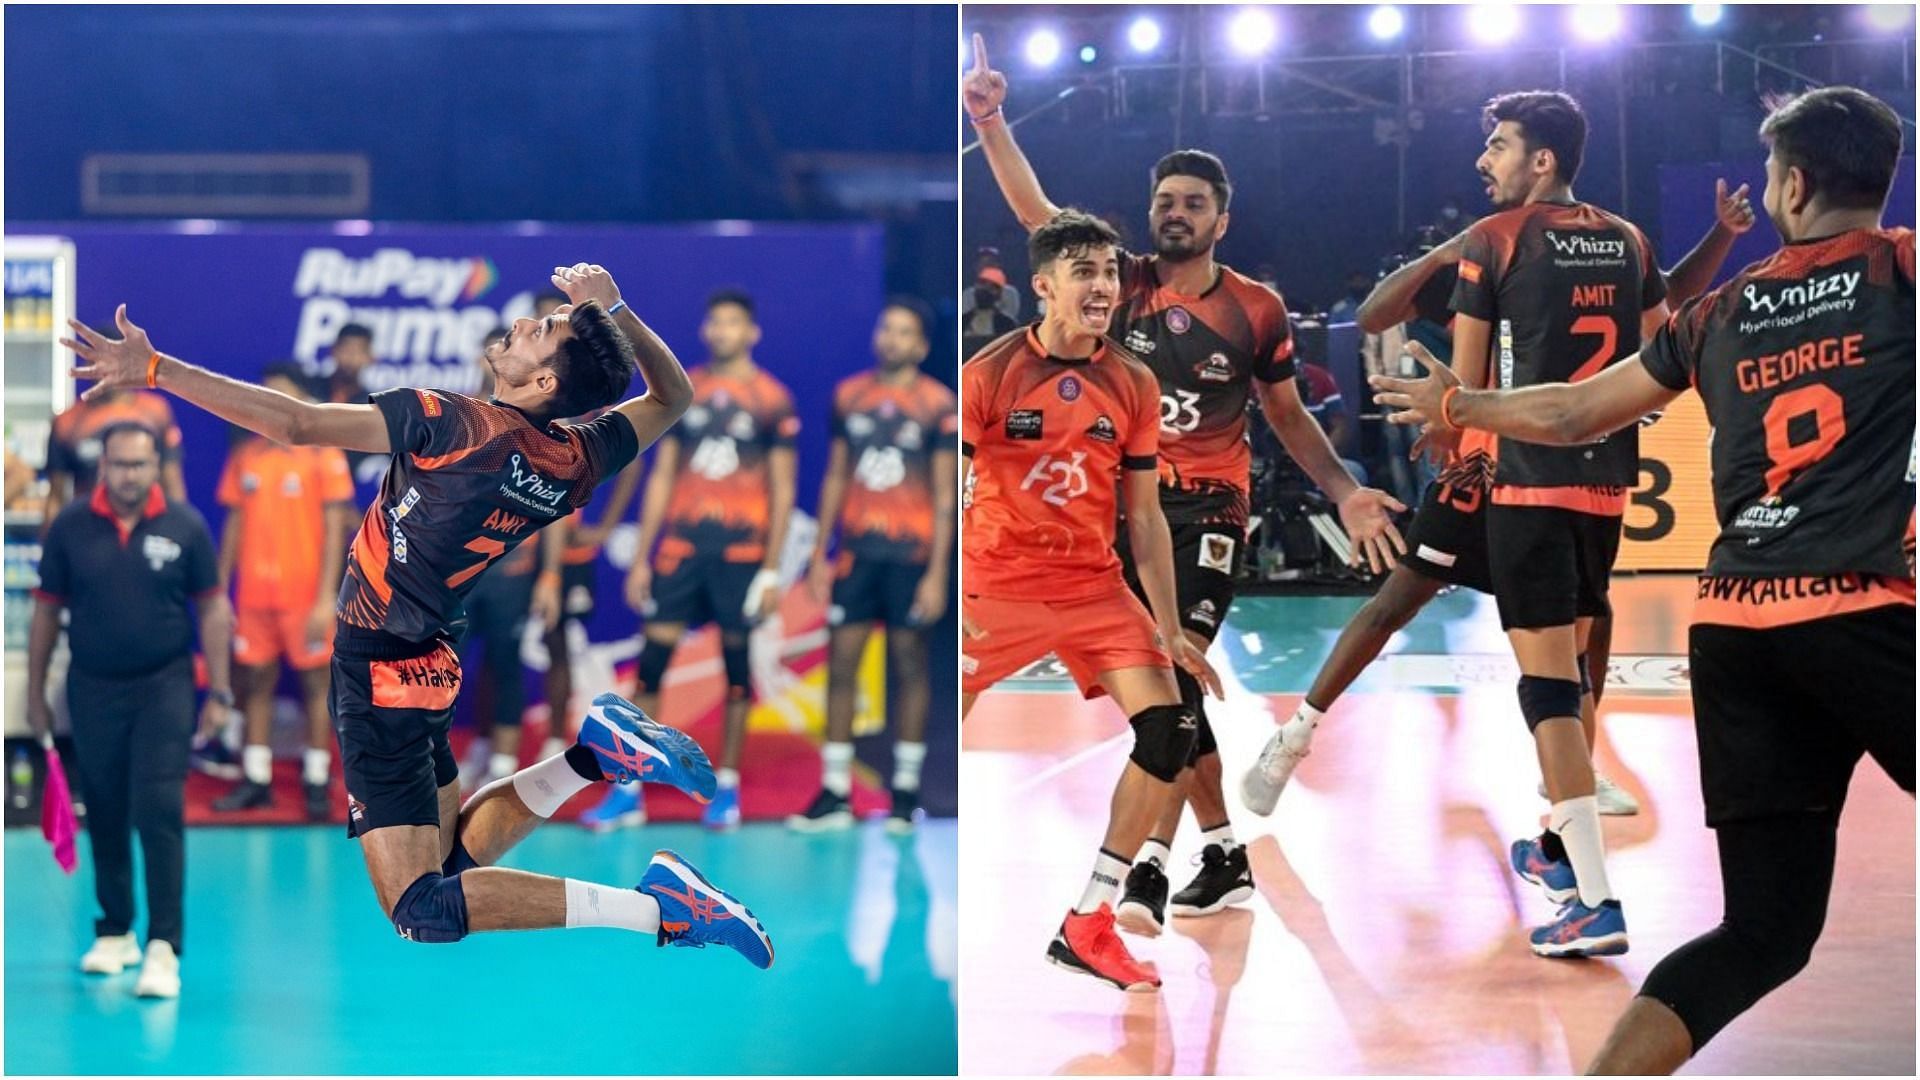 Amit Gulia and the Black Hawks in action (Pic Credit: PVl)